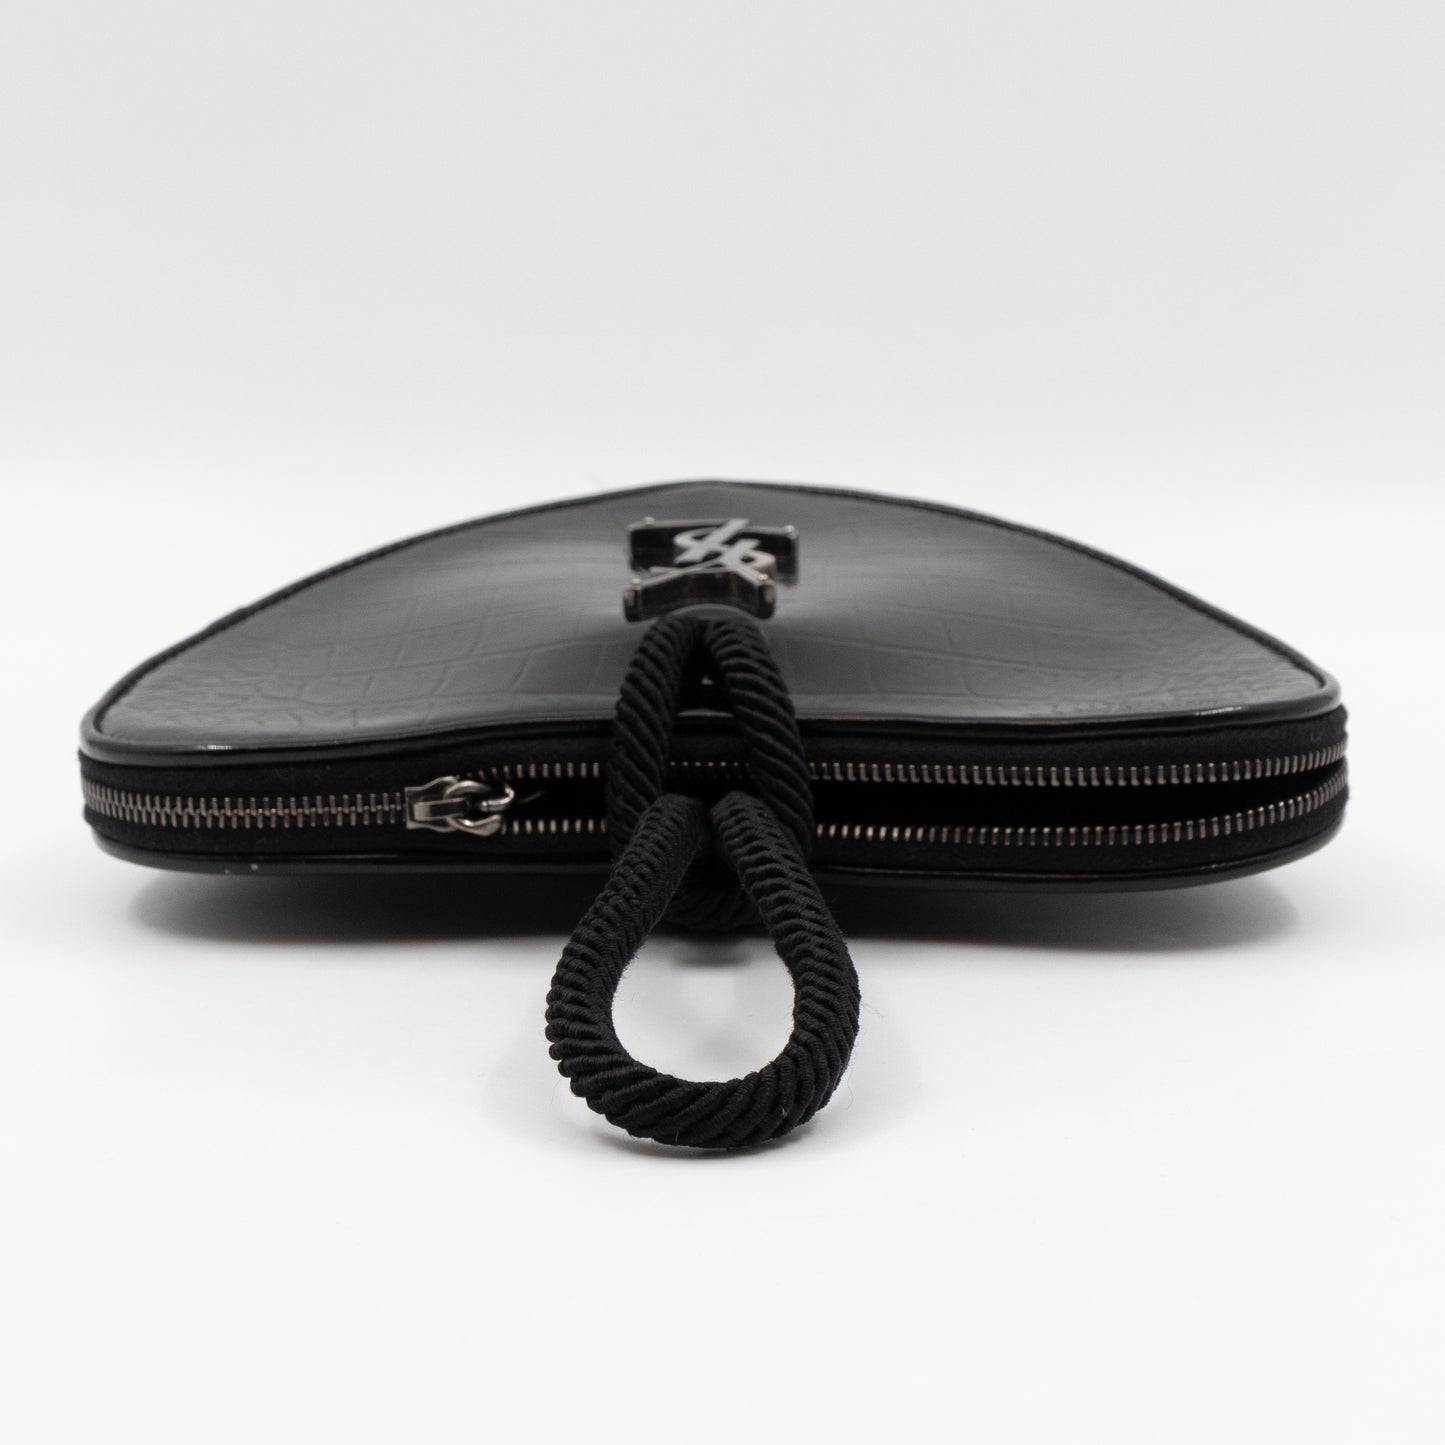 Sac Coeur Heart Clutch Black Croc Embossed Patent Leather